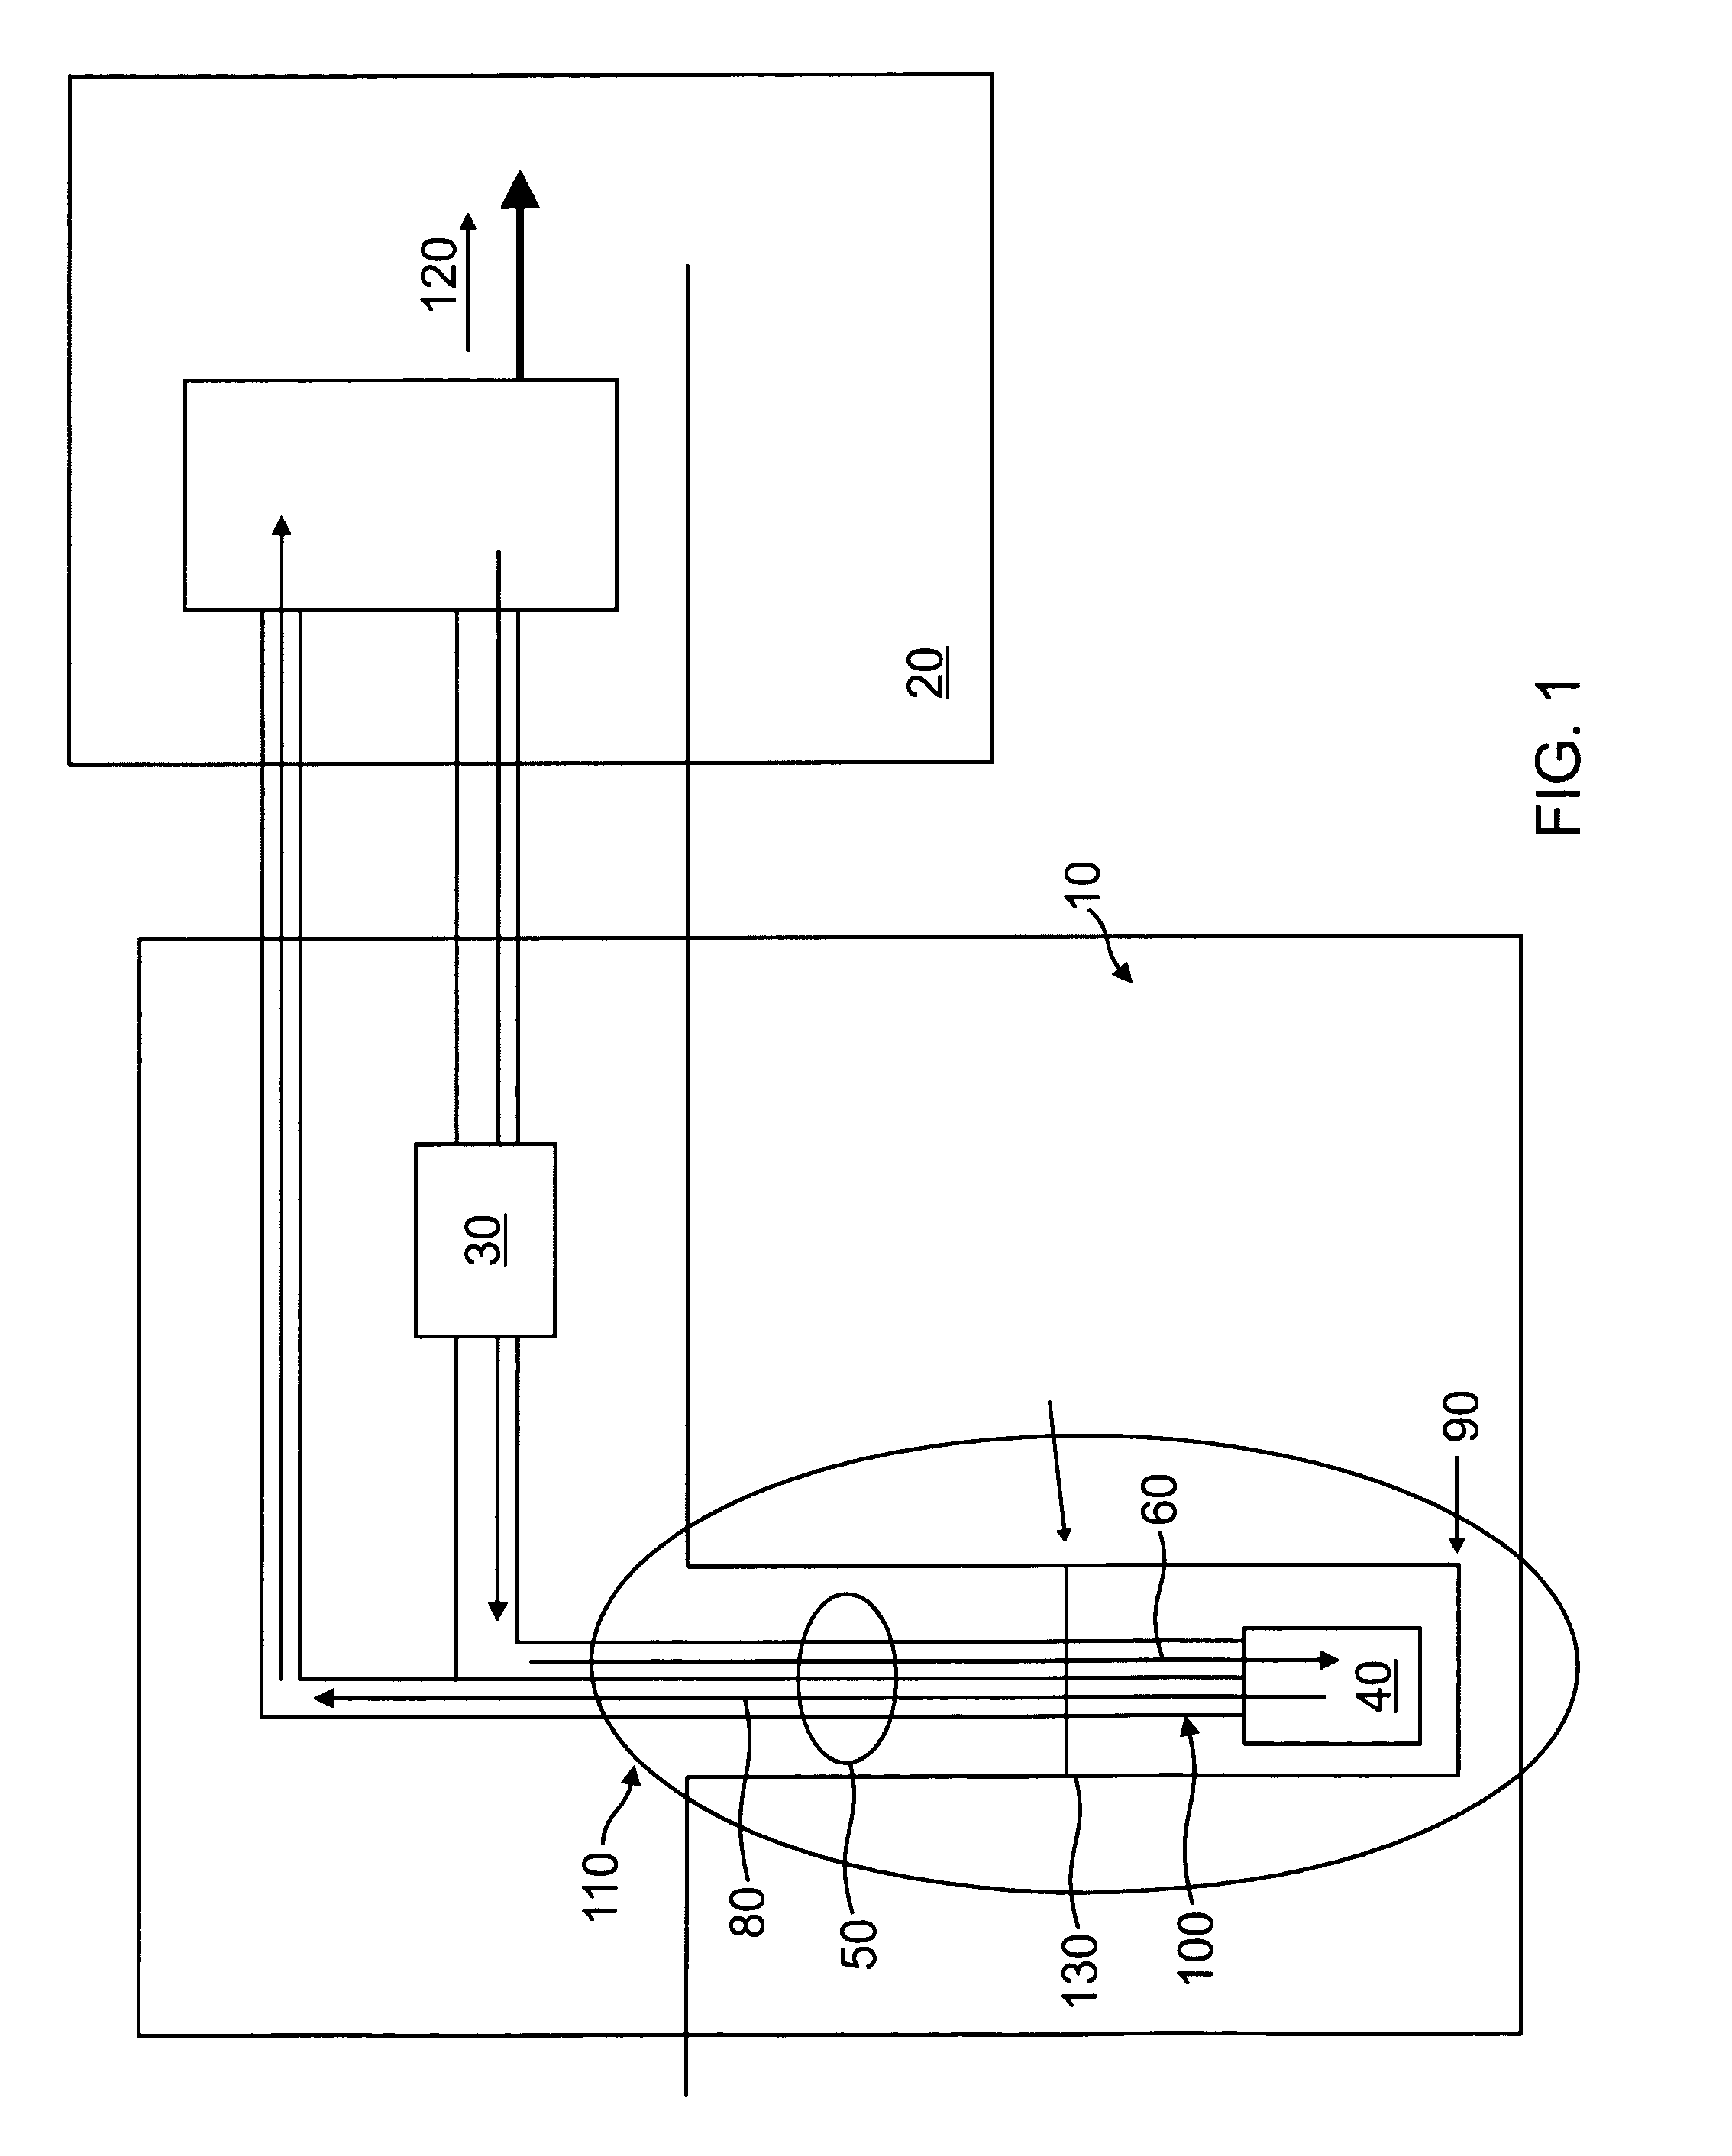 System and method of capturing geothermal heat from within a drilled well to generate electricity